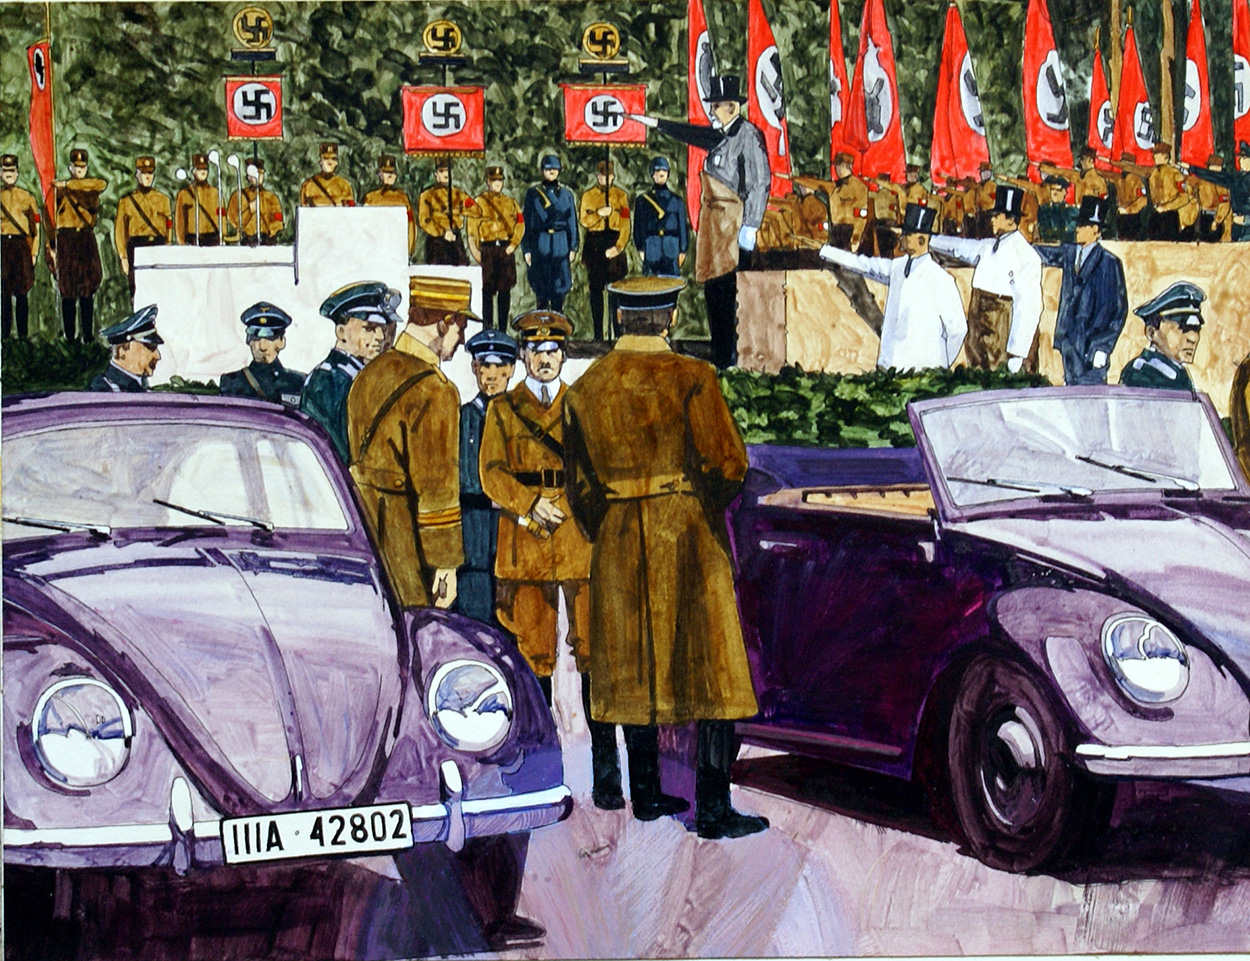 Hitler inspecting the VW Beetle (Original) art by Gerry Wood Art at The Illustration Art Gallery